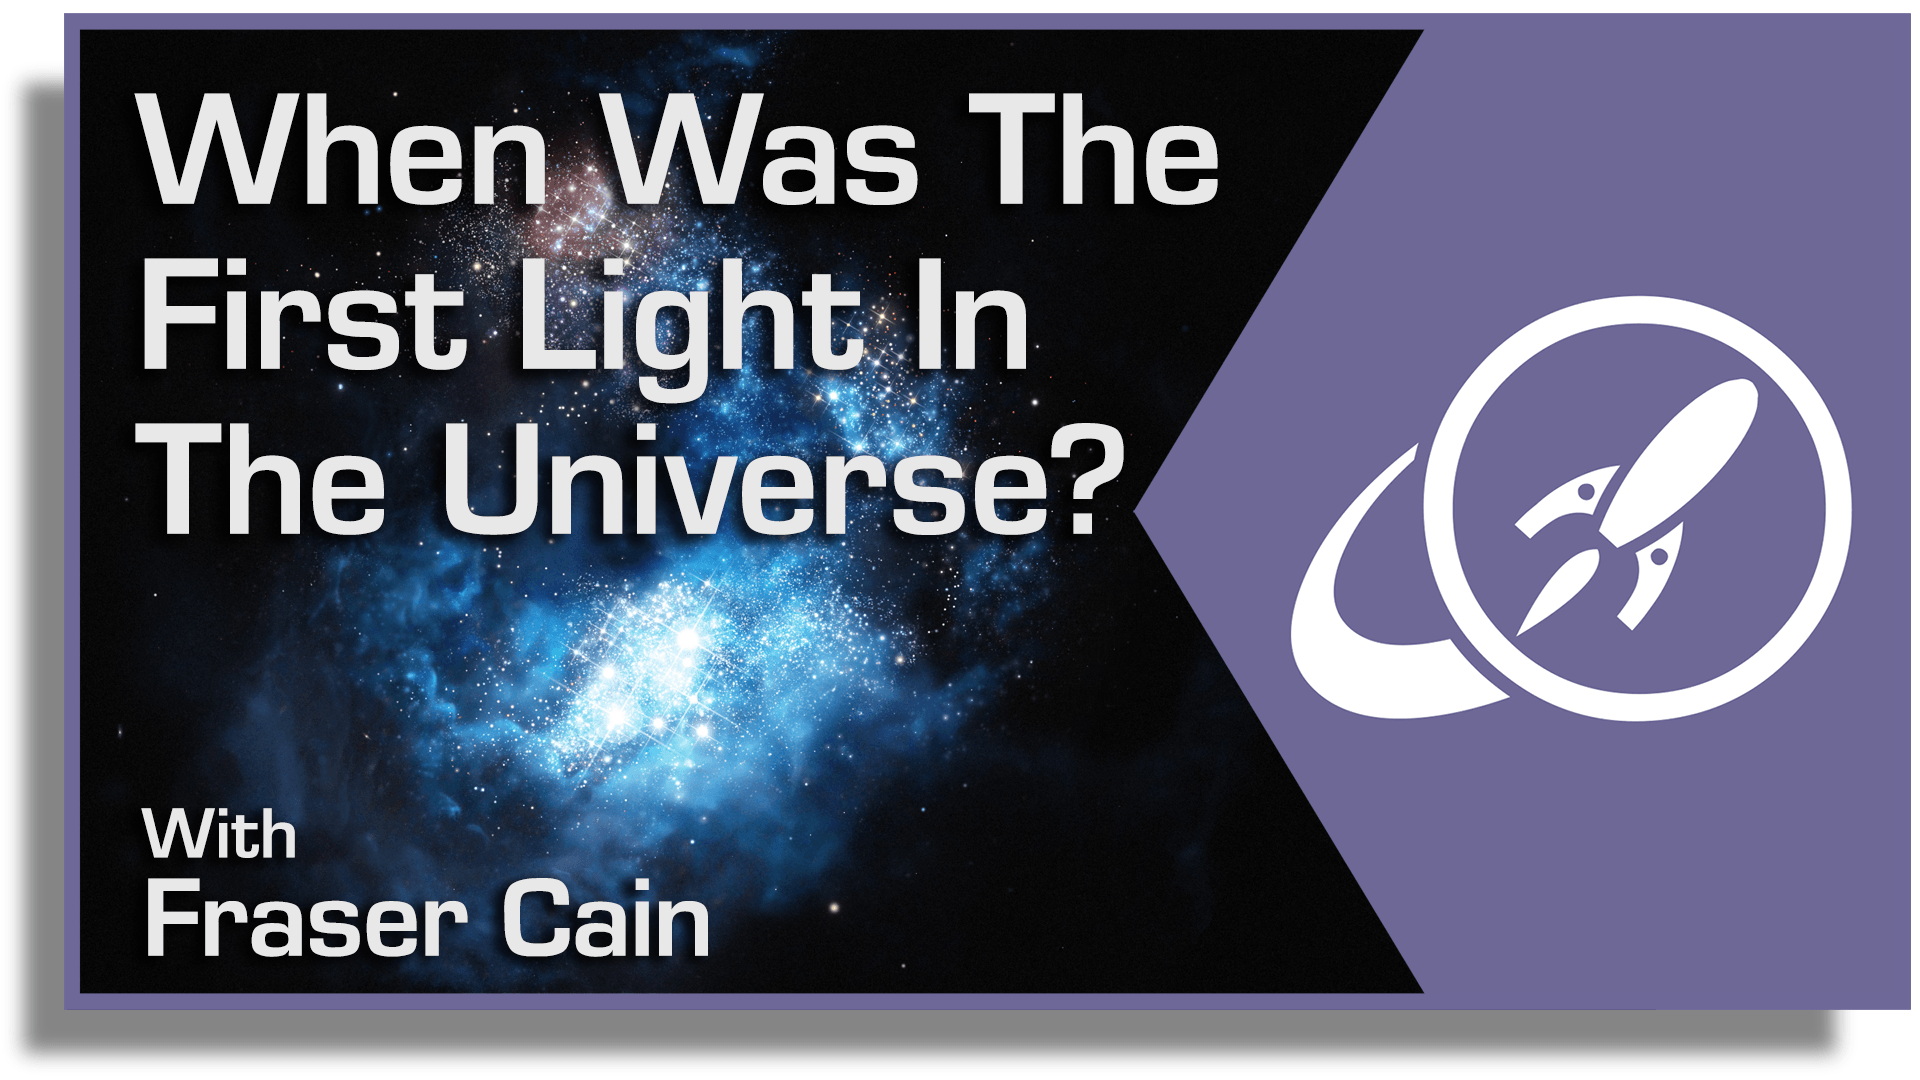 When Was the First Light in the Universe?